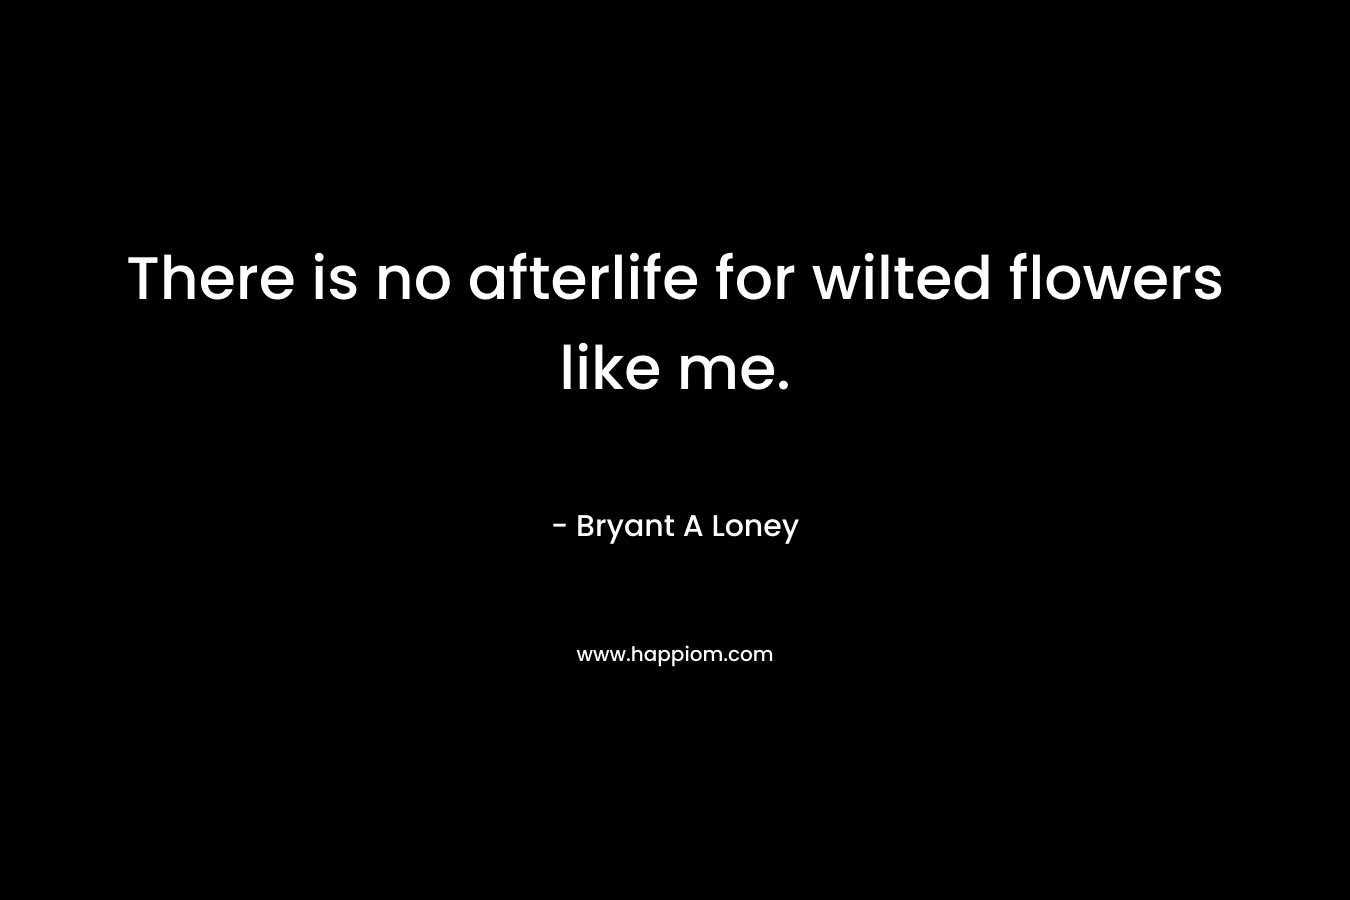 There is no afterlife for wilted flowers like me.